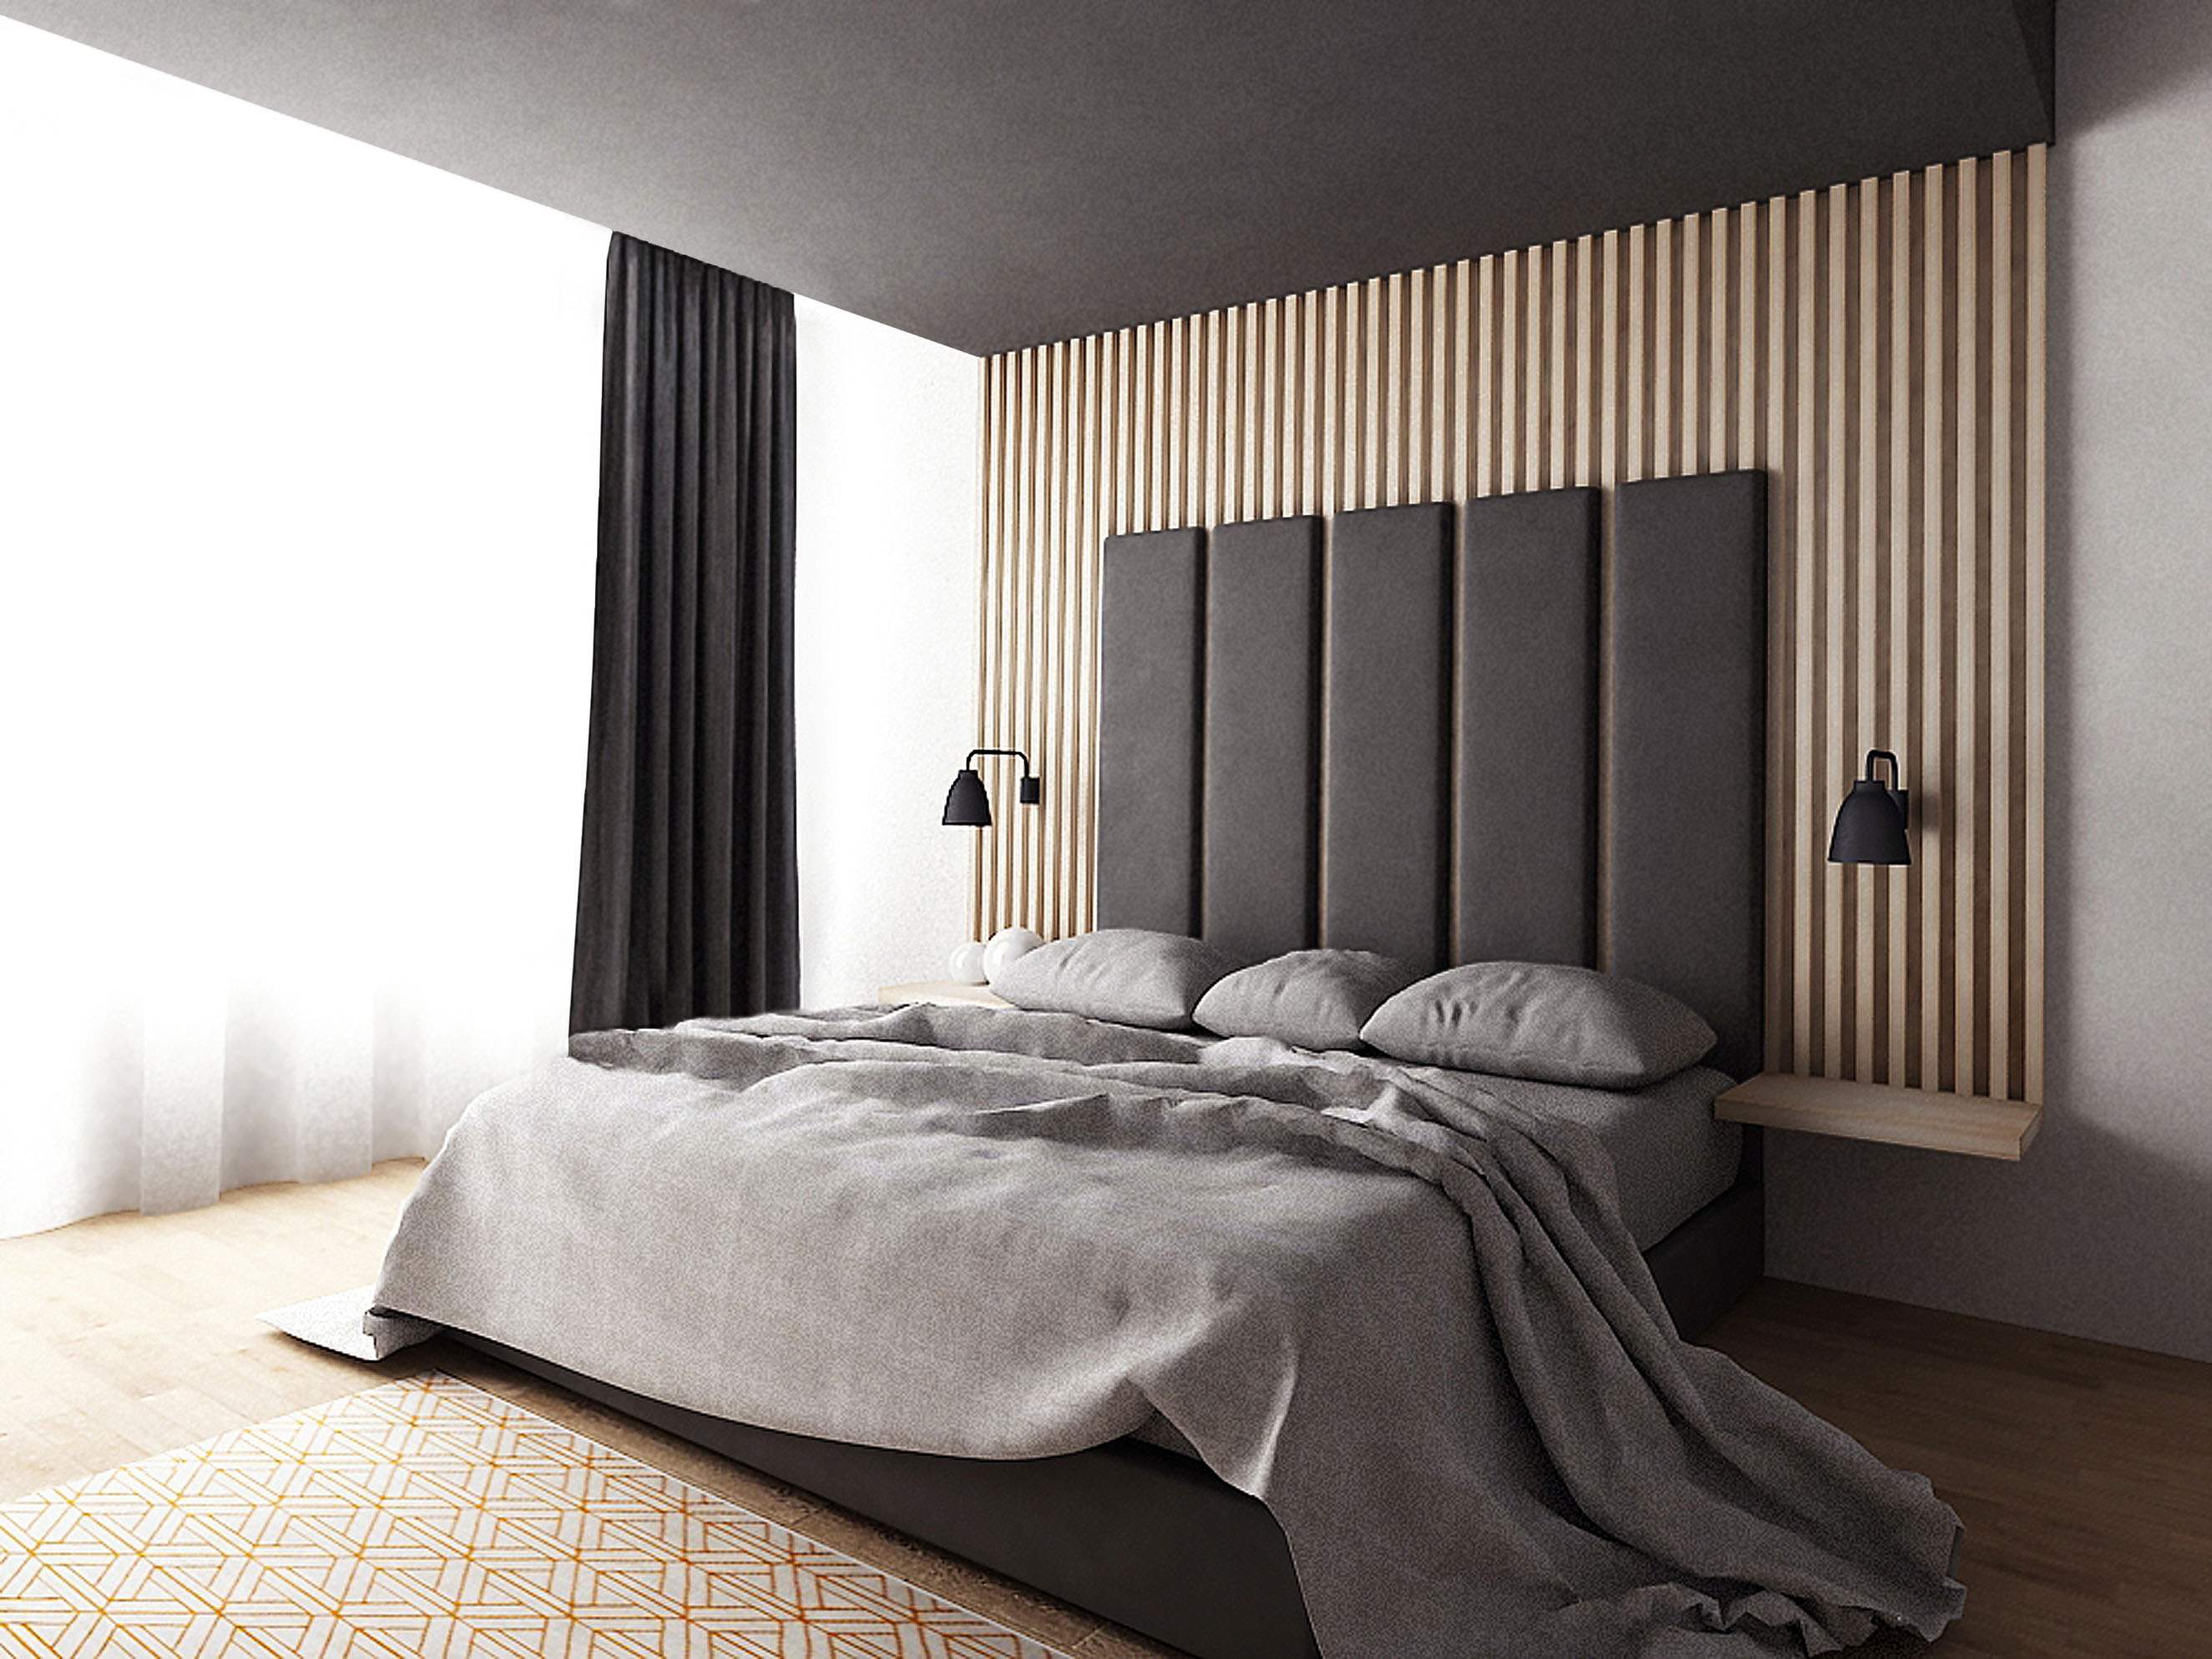 Neutral master bedroom in grey and wood paneling 